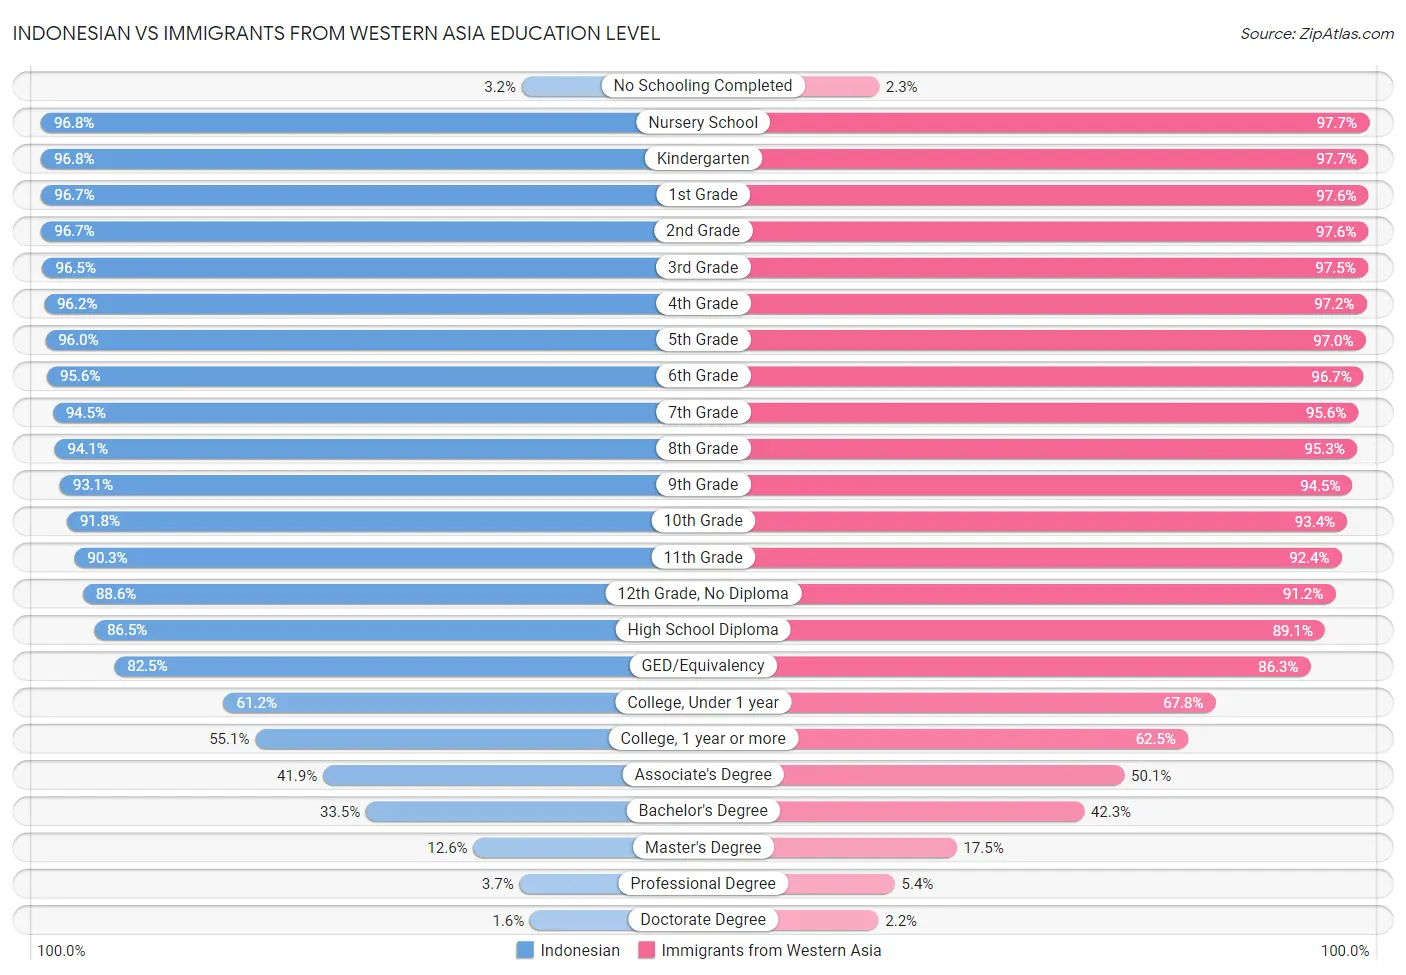 Indonesian vs Immigrants from Western Asia Education Level